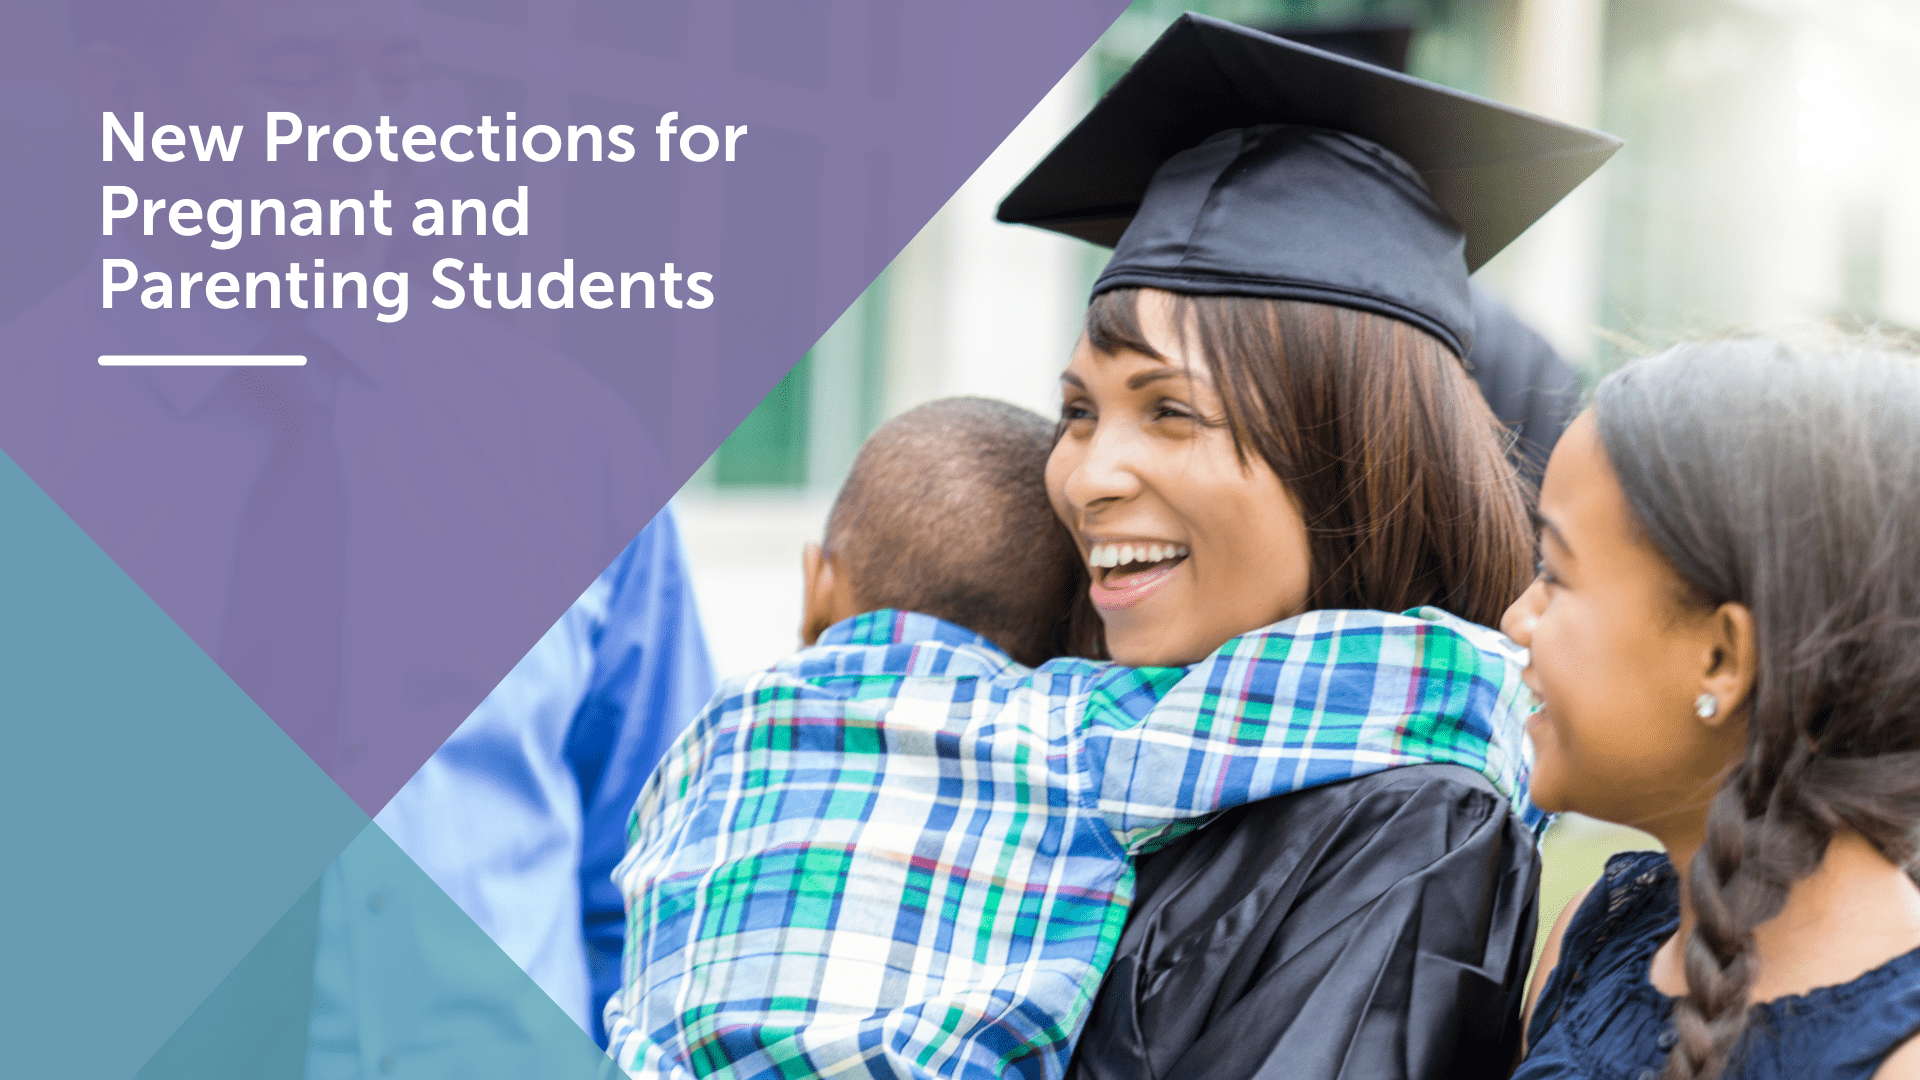 New Protections for Pregnant and Parenting Students